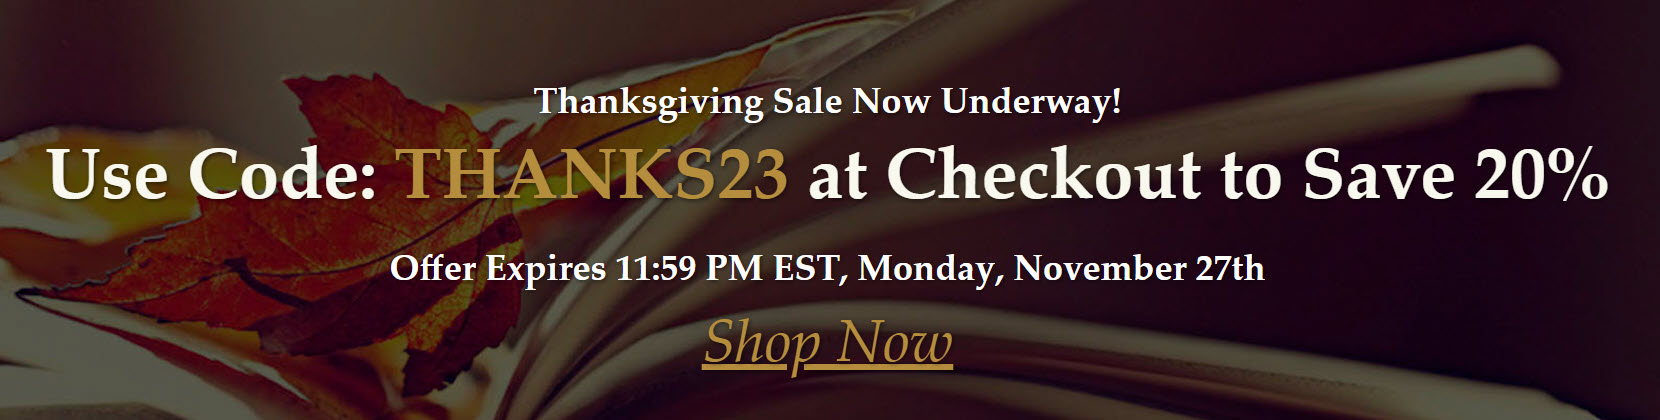 Thanksgiving Sale on Genealogy Books! Save 20% on Your Favorites!